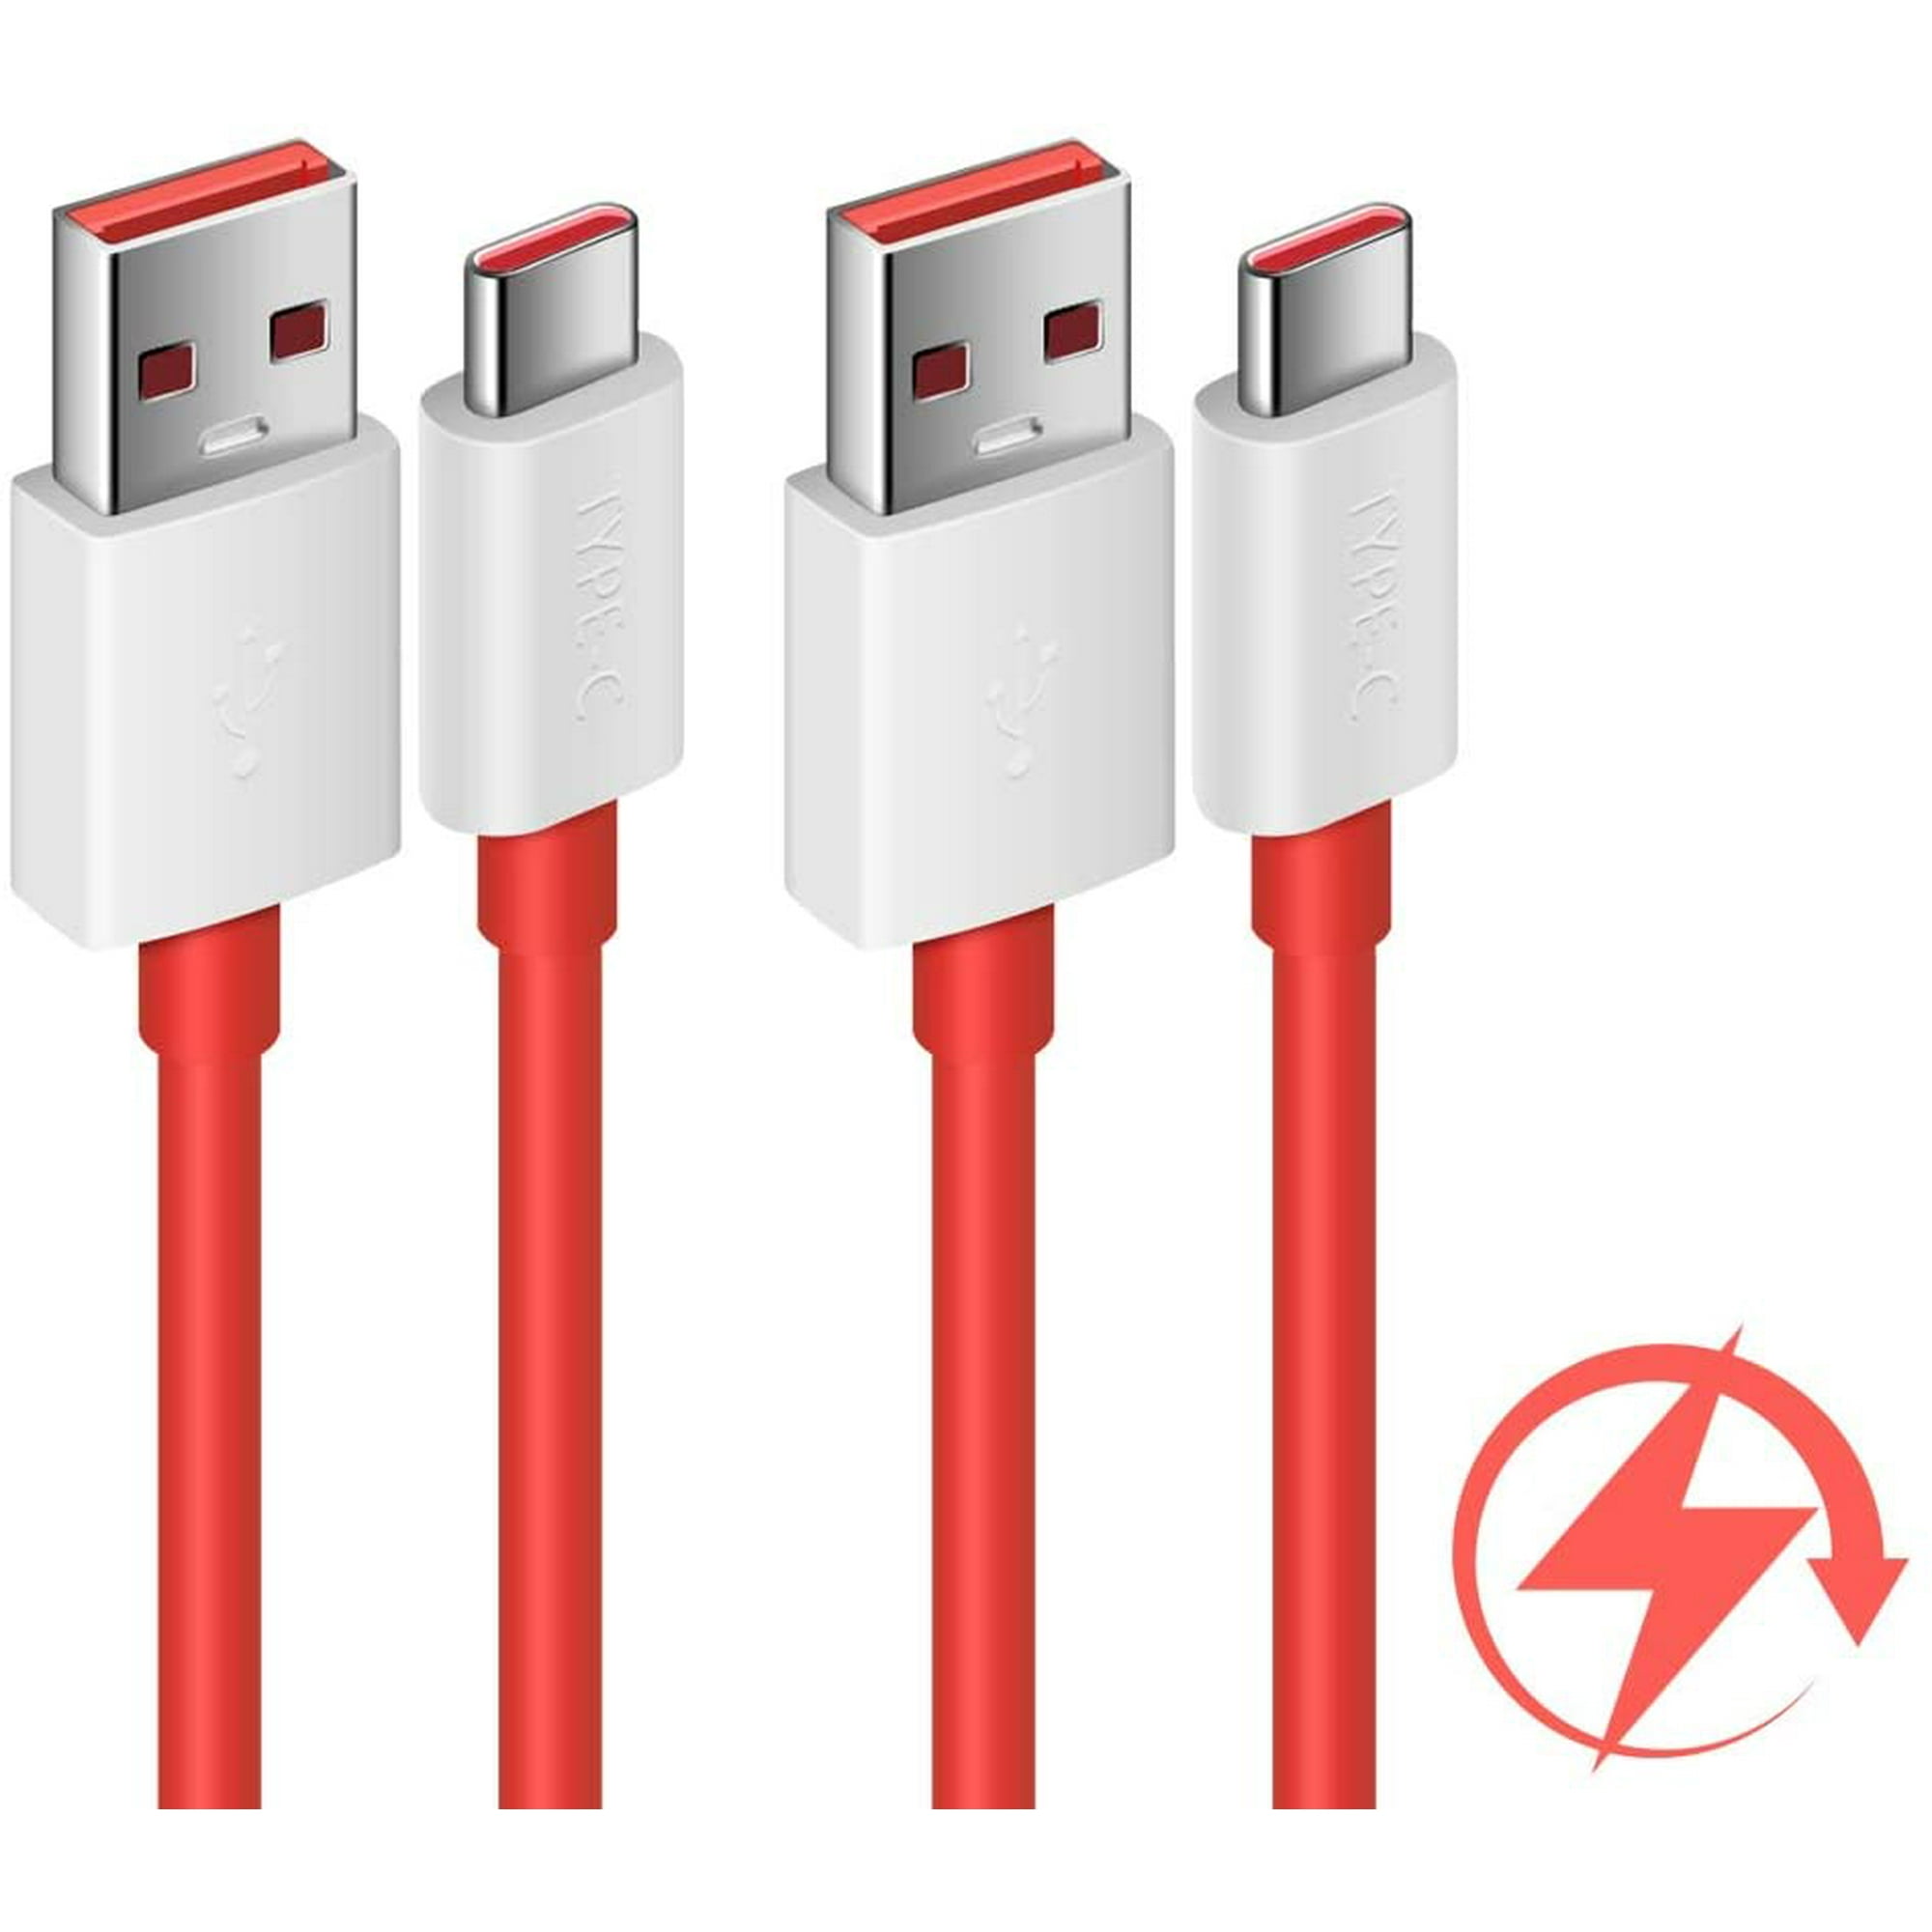 sydvest Kan ignoreres udskille COOYA 5V 4A Dash Charge Cable for OnePlus 7, Warp Charge for OnePlus 7 Pro/  7T, 6FT 2Pack USB C Charger Cable Long USB | Walmart Canada